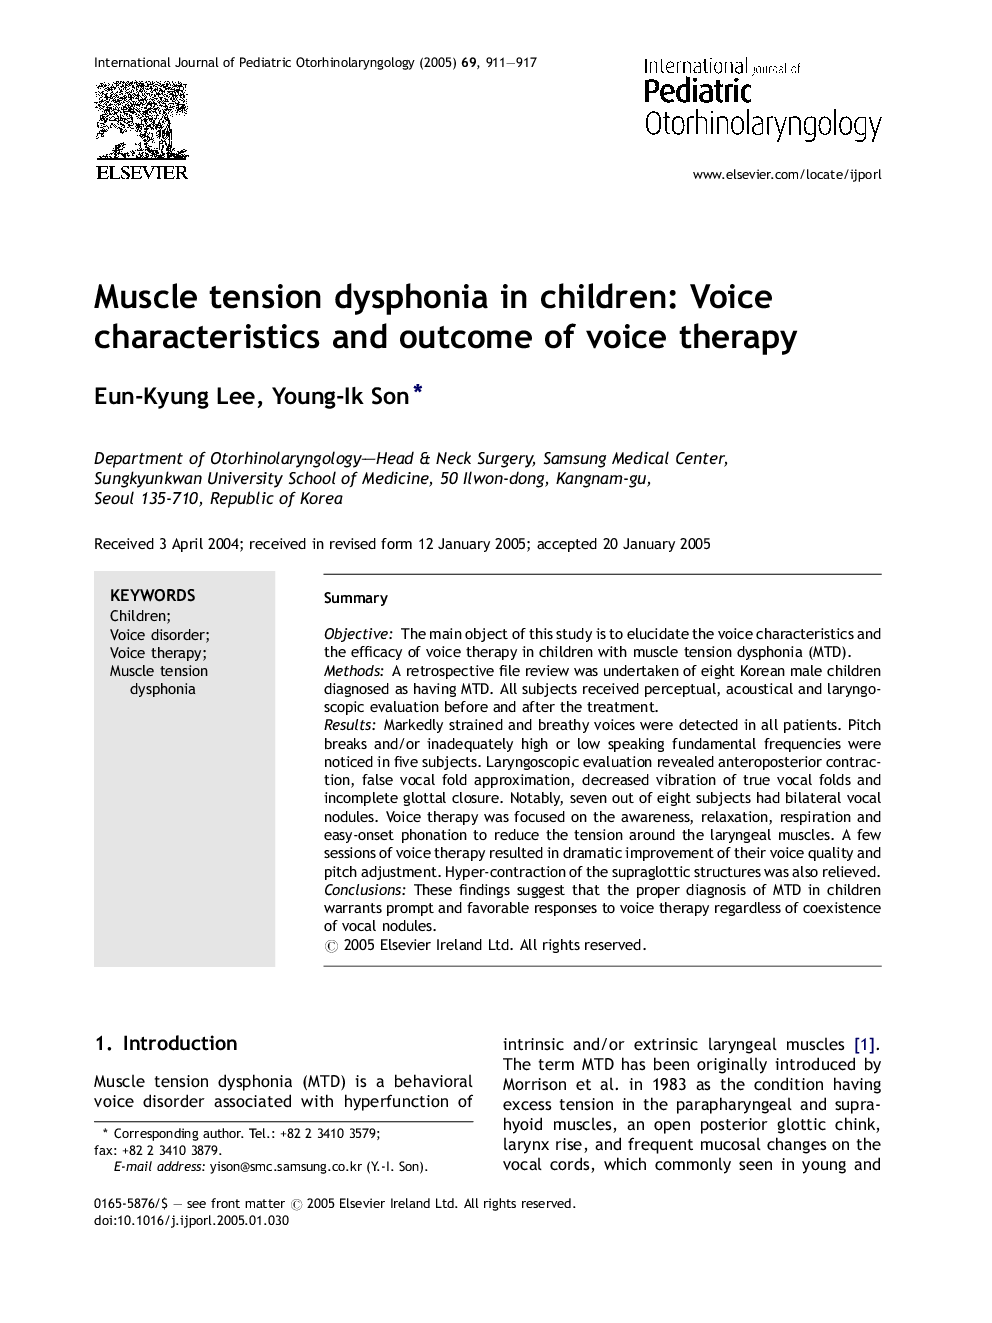 Muscle tension dysphonia in children: Voice characteristics and outcome of voice therapy